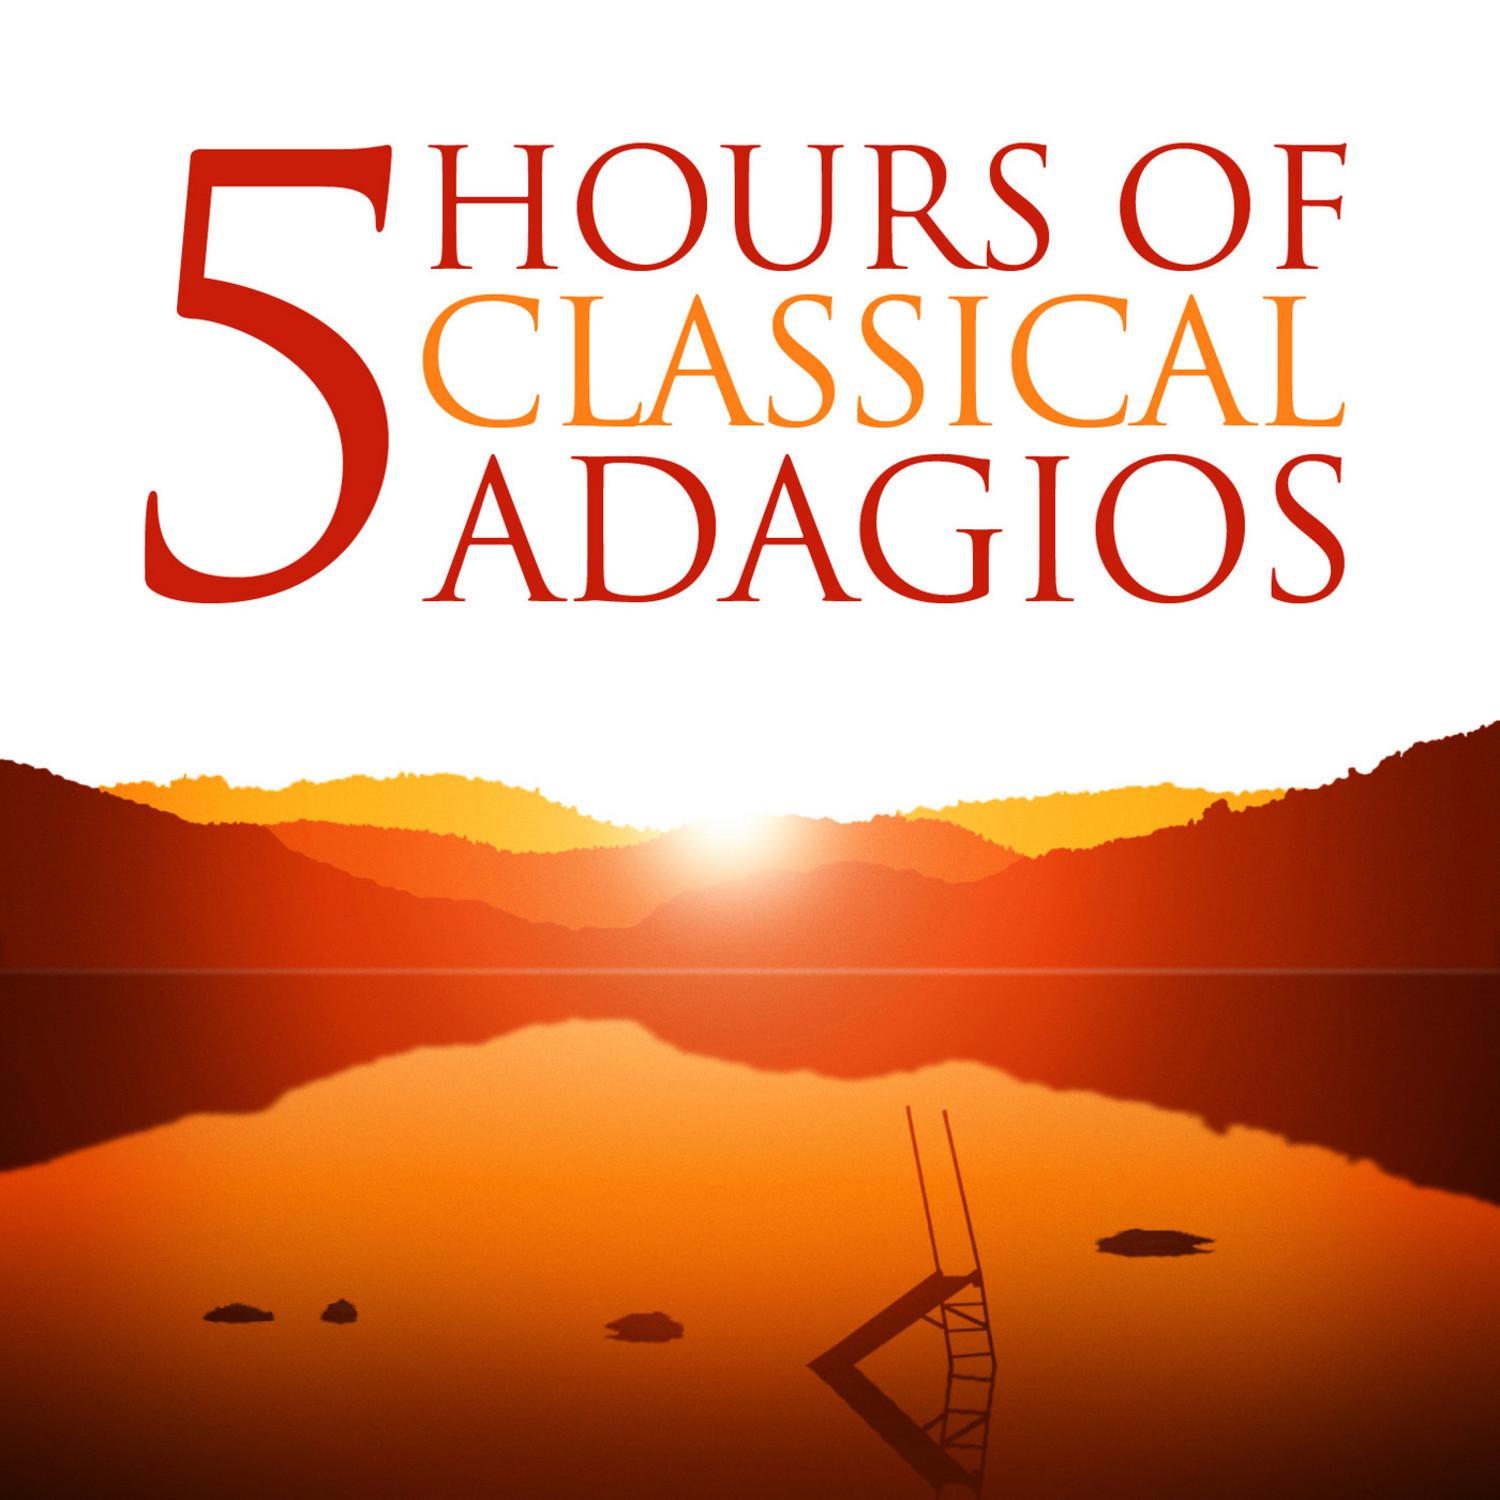 Concerto No. 10 in D Minor for Organ and Orchestra, HWV 309, Op. 7: I. Adagio